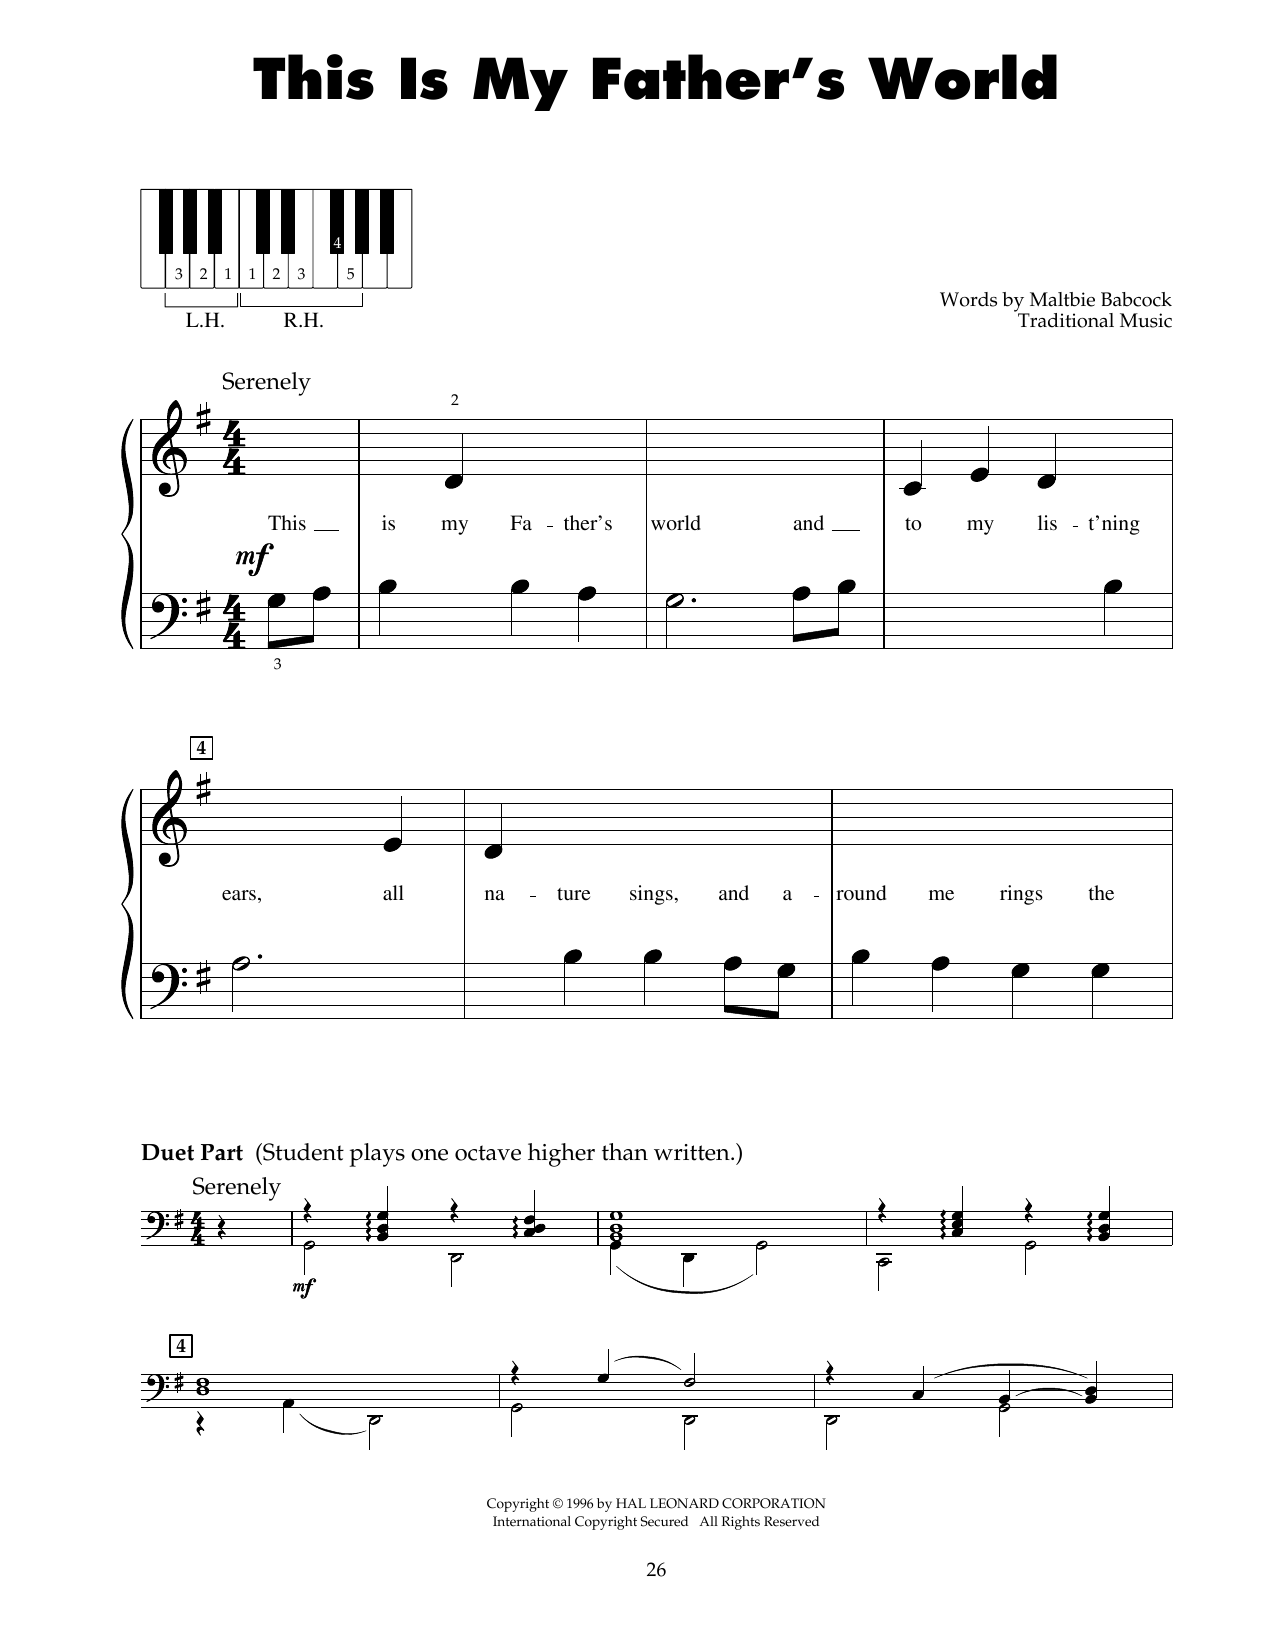 Download Franklin L. Sheppard This Is My Father's World Sheet Music